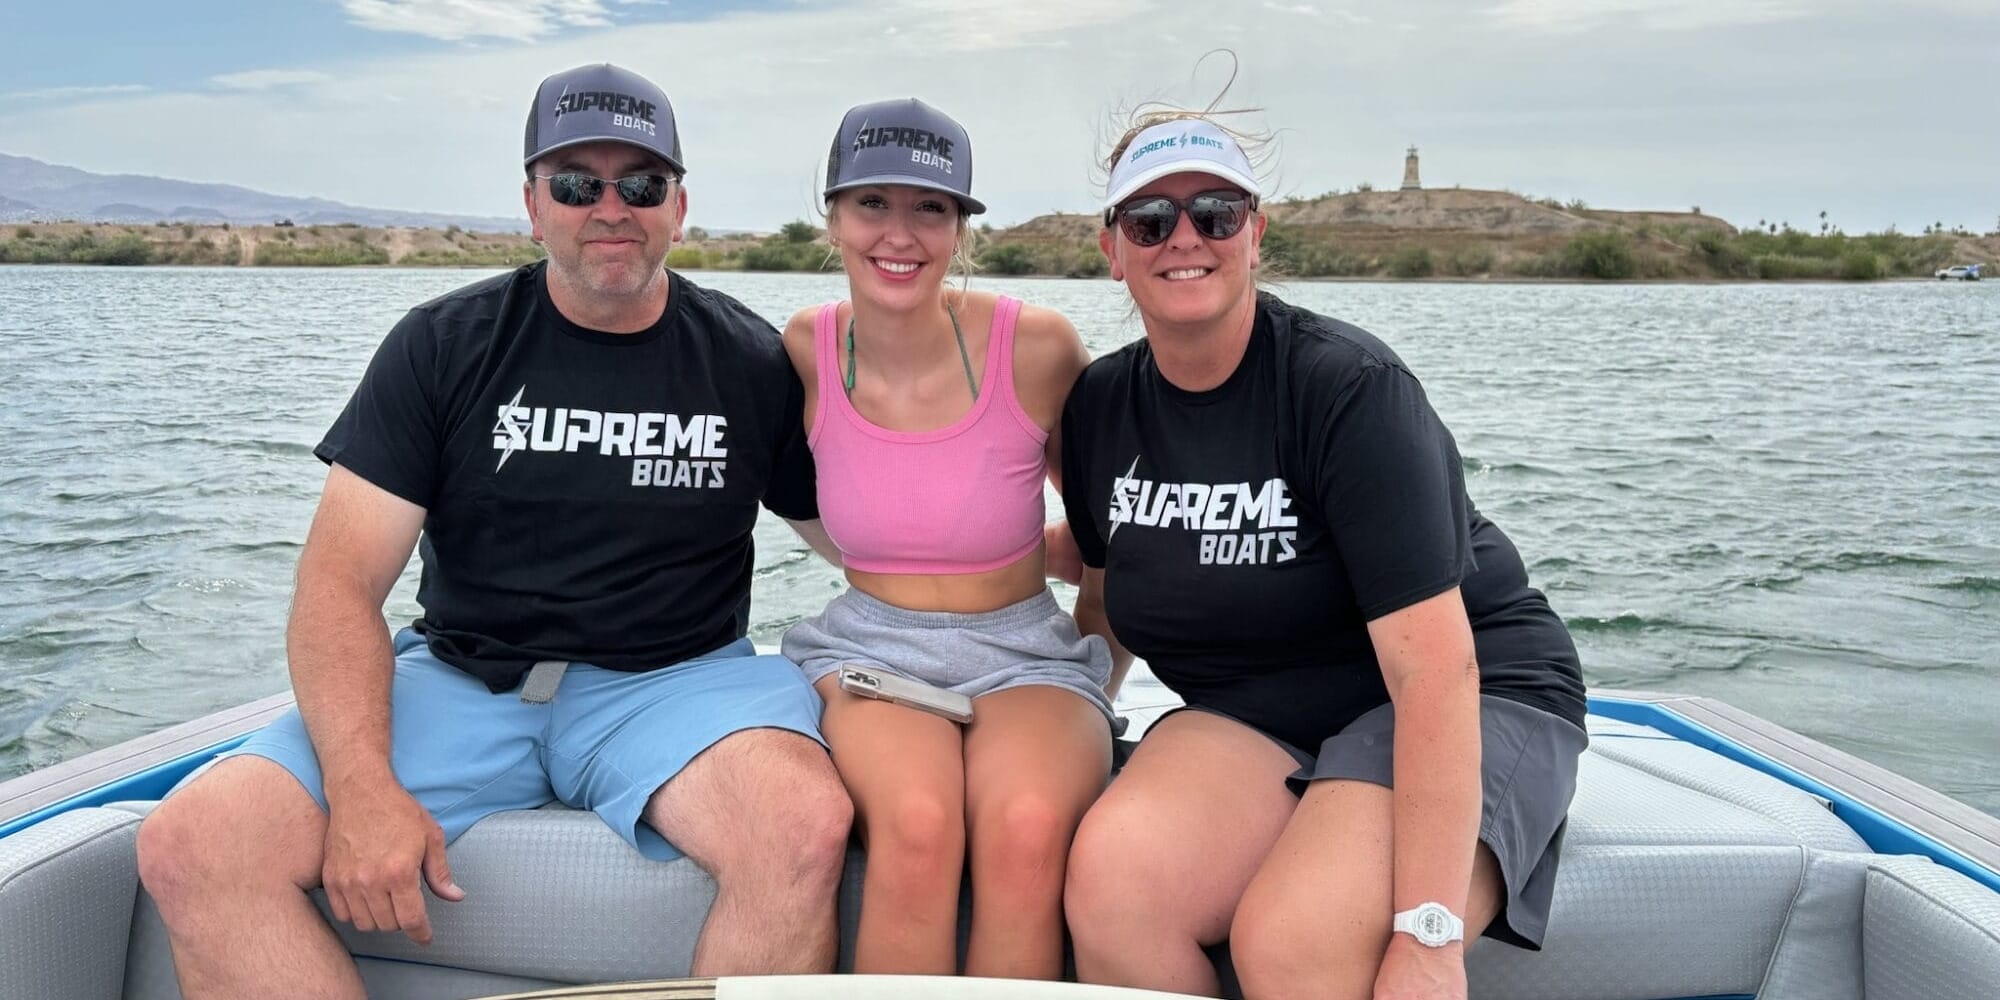 Three people, likely from the Gilmore family, wearing Supreme Boats hats sit together on a boat in open water. Two women in pink and black tops are flanked by a man in a black shirt and blue shorts. A wakeboard rests in front of them, hinting at their Lake Havasu adventure.